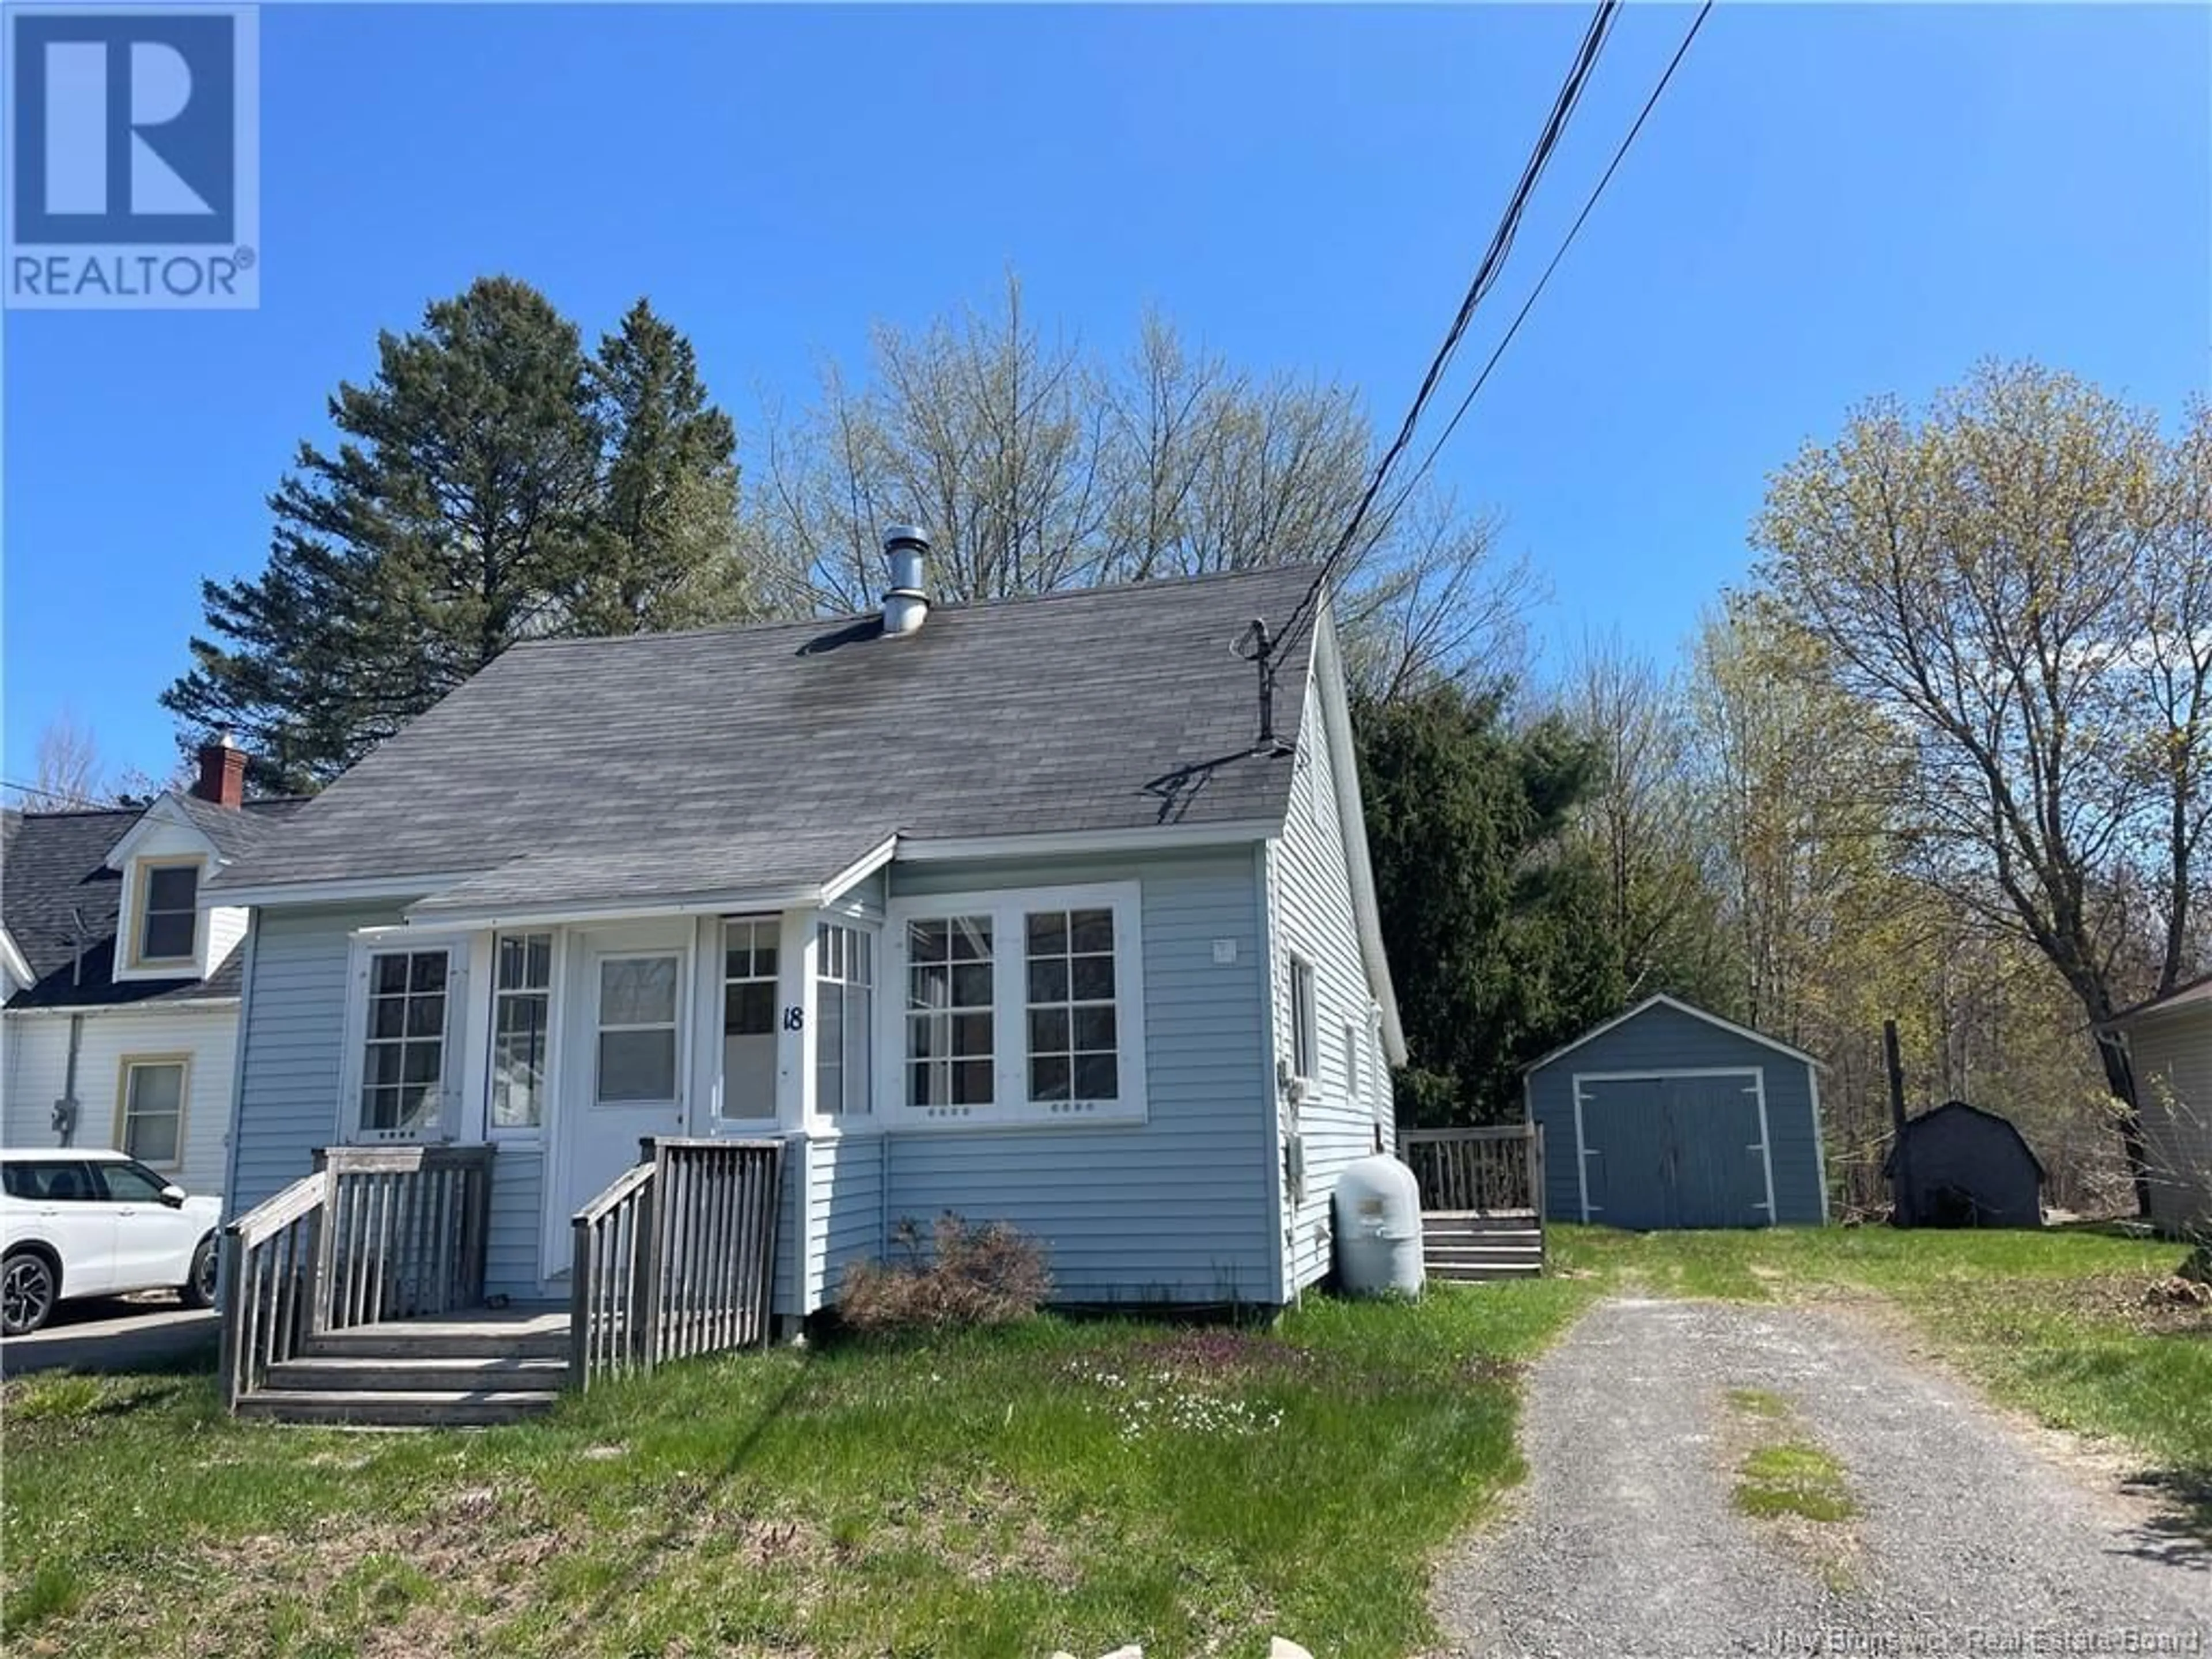 Cottage for 18 Murray Avenue, Fredericton New Brunswick E3A3Y5